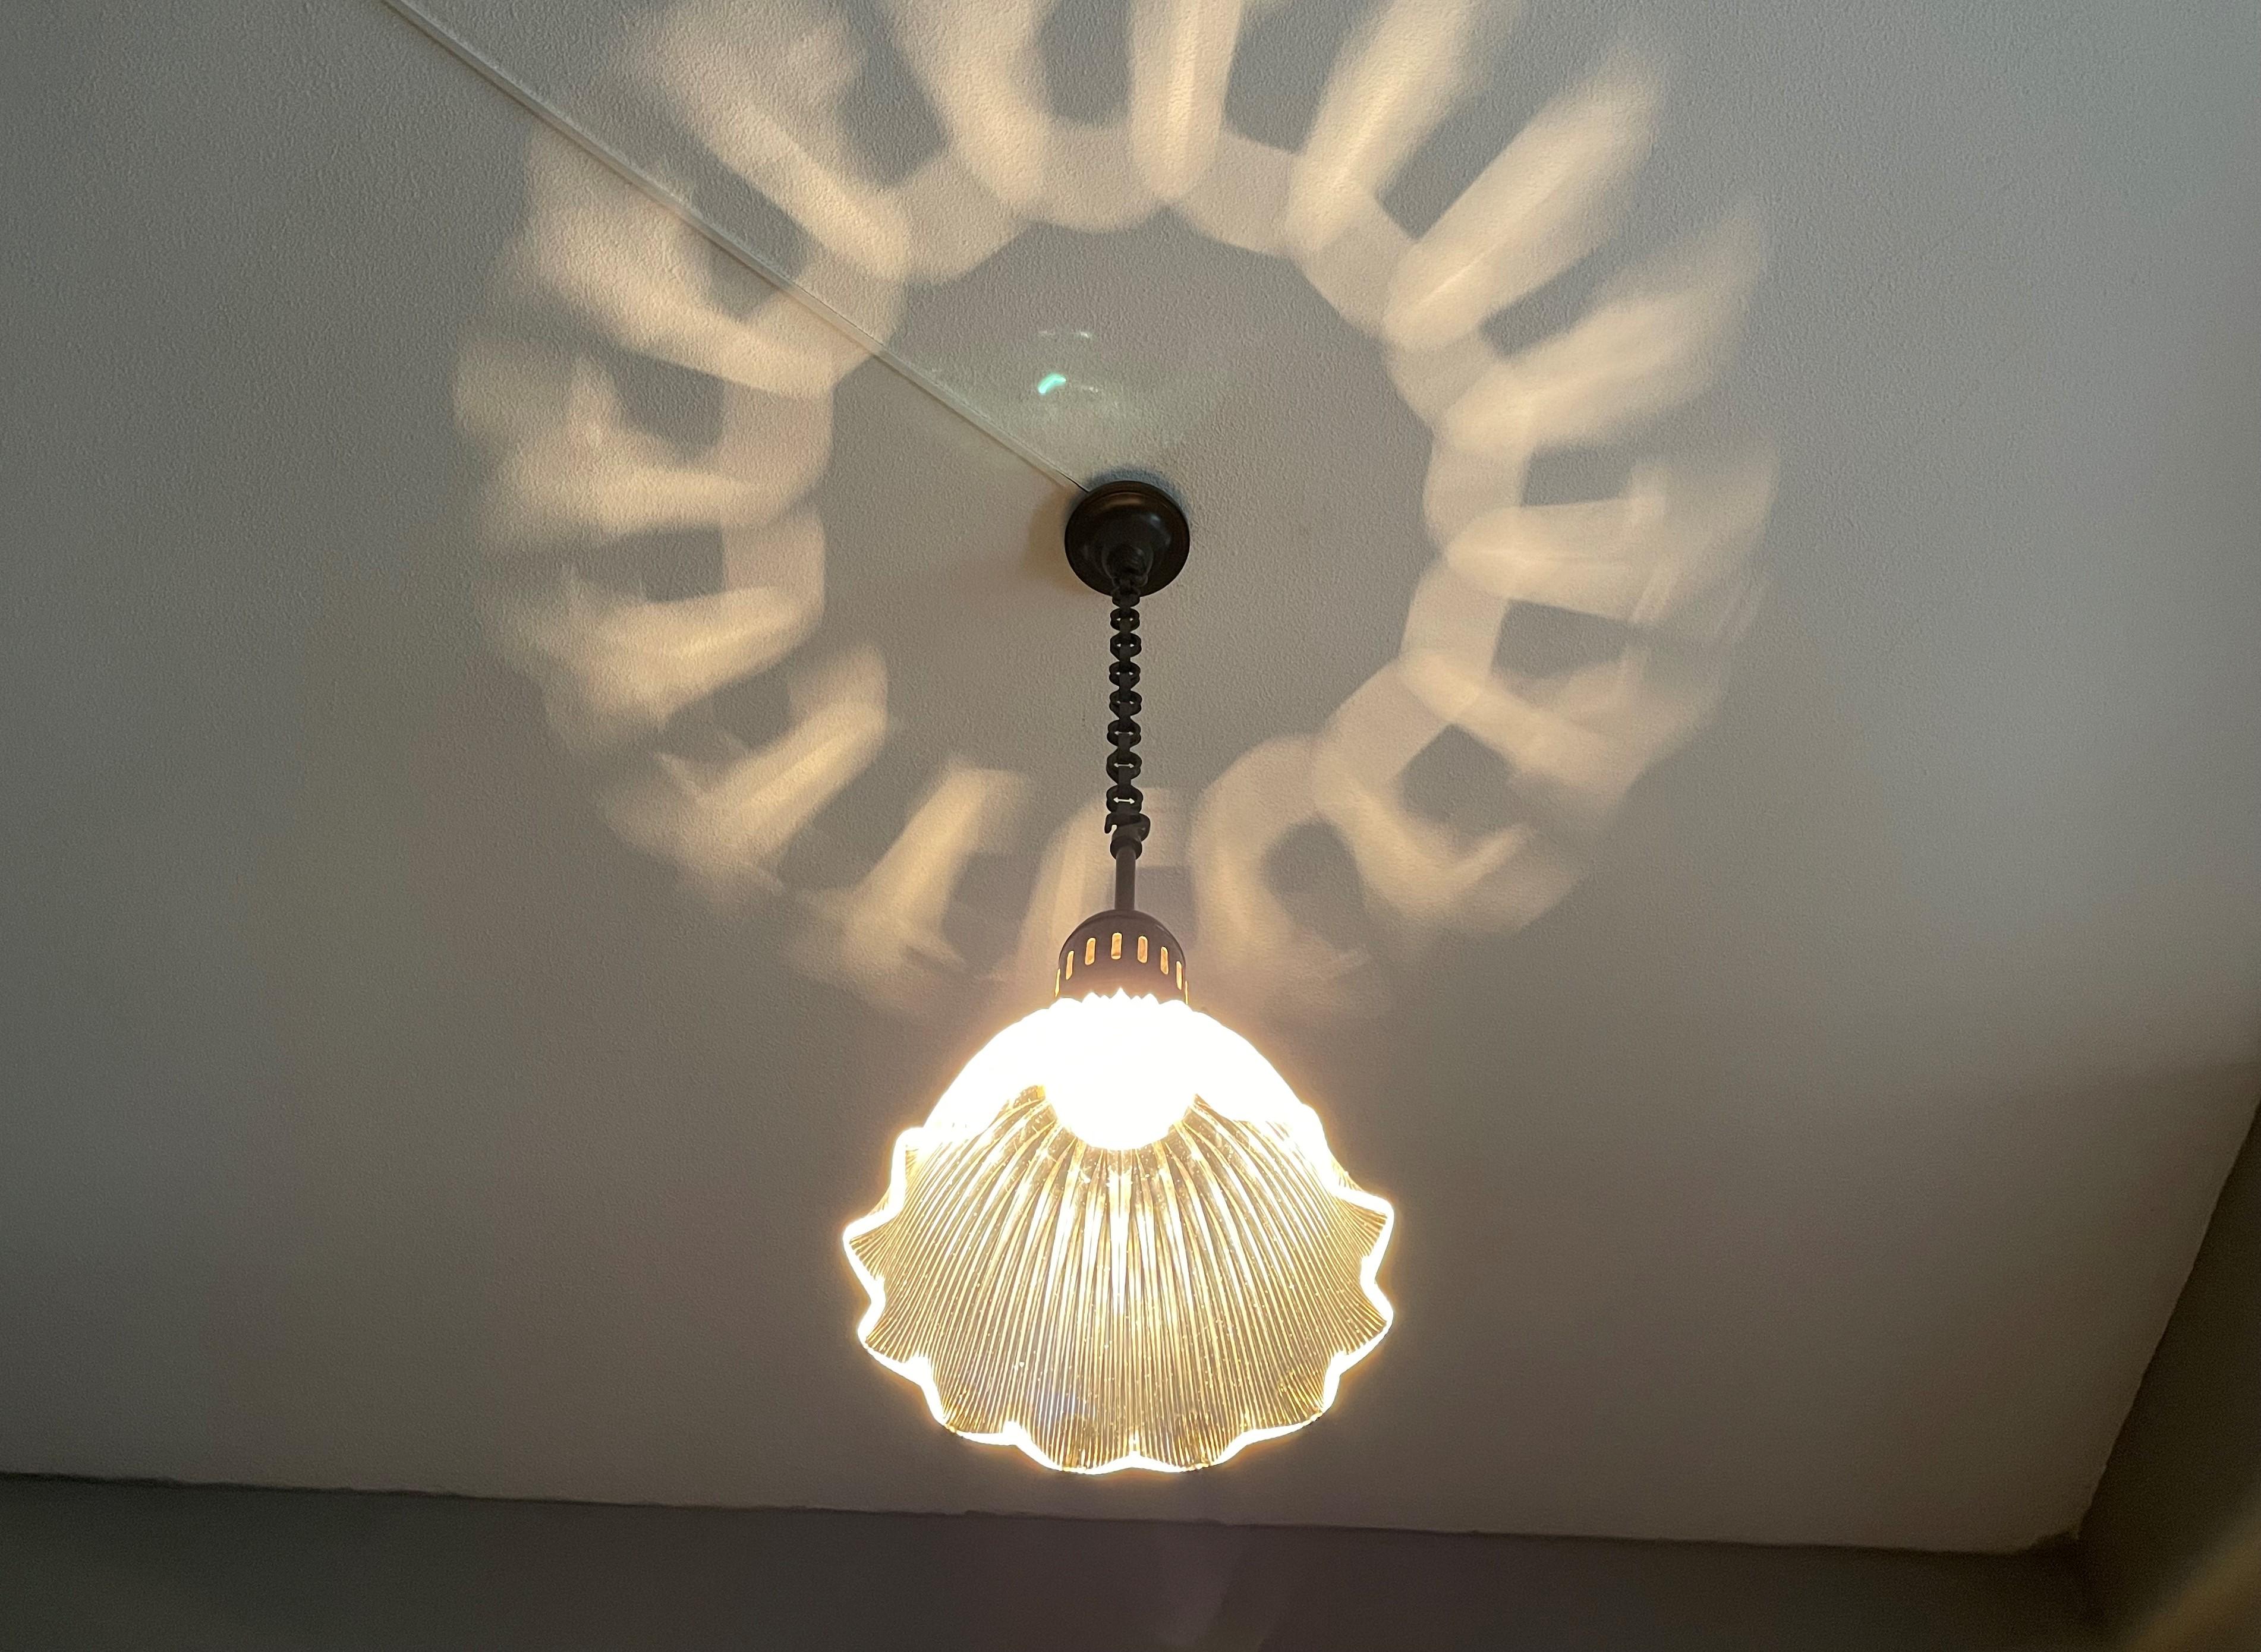 Stylish, timeless and completely original antique pendant by Holophane, France.

If you are looking for the ideal pendant to light up your entrance, hallway, writing table, desk or maybe a small room then this antique brand name fixture could be